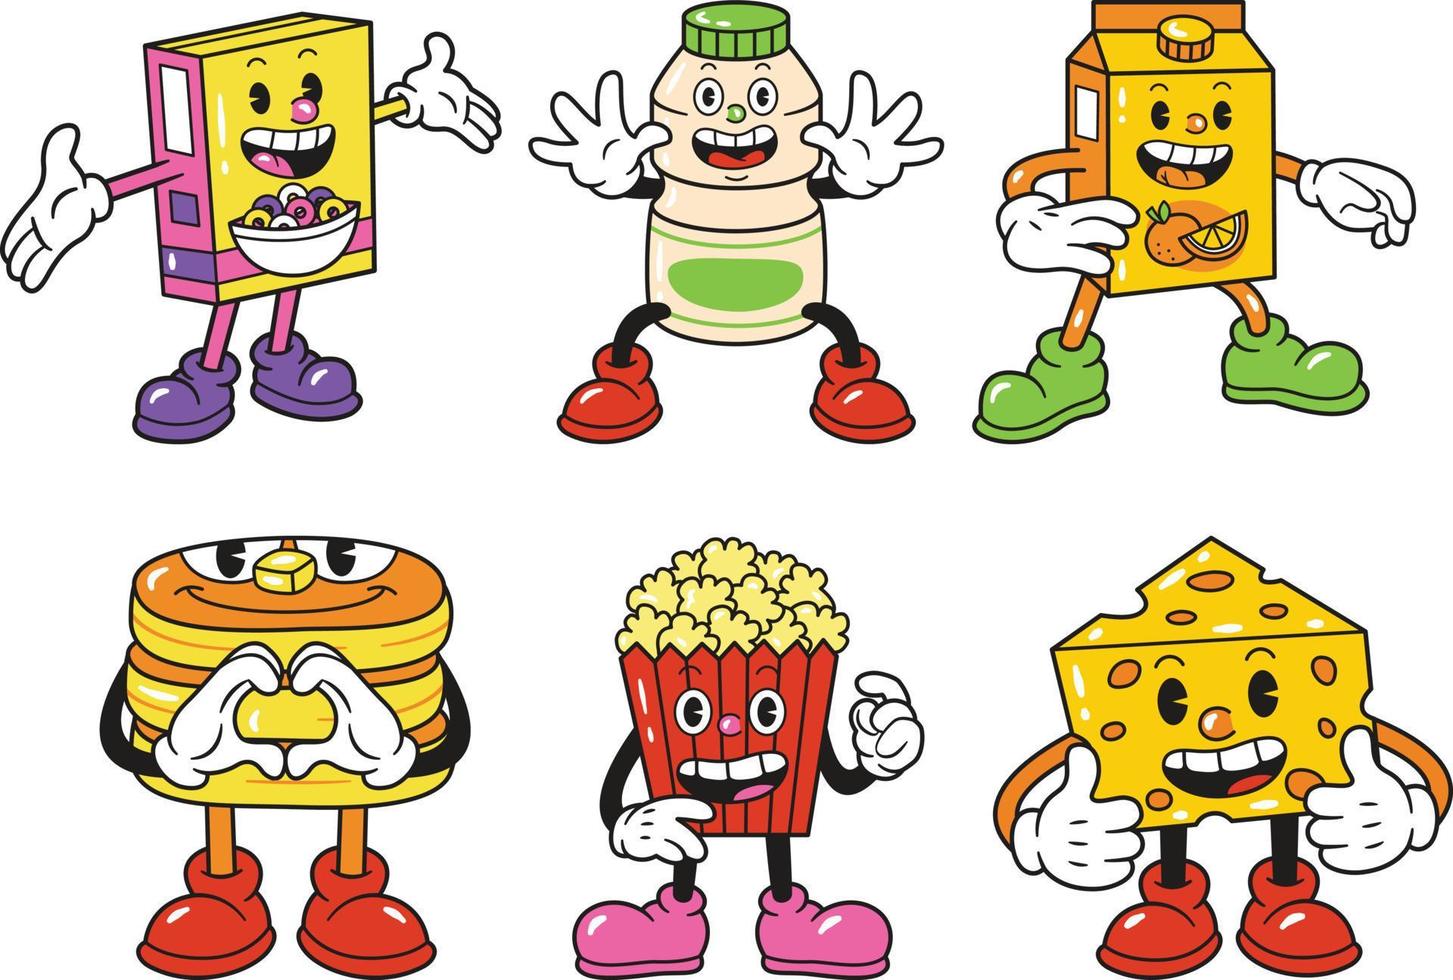 Cartoon cheese character set with different emotions and expressions. Vector illustration